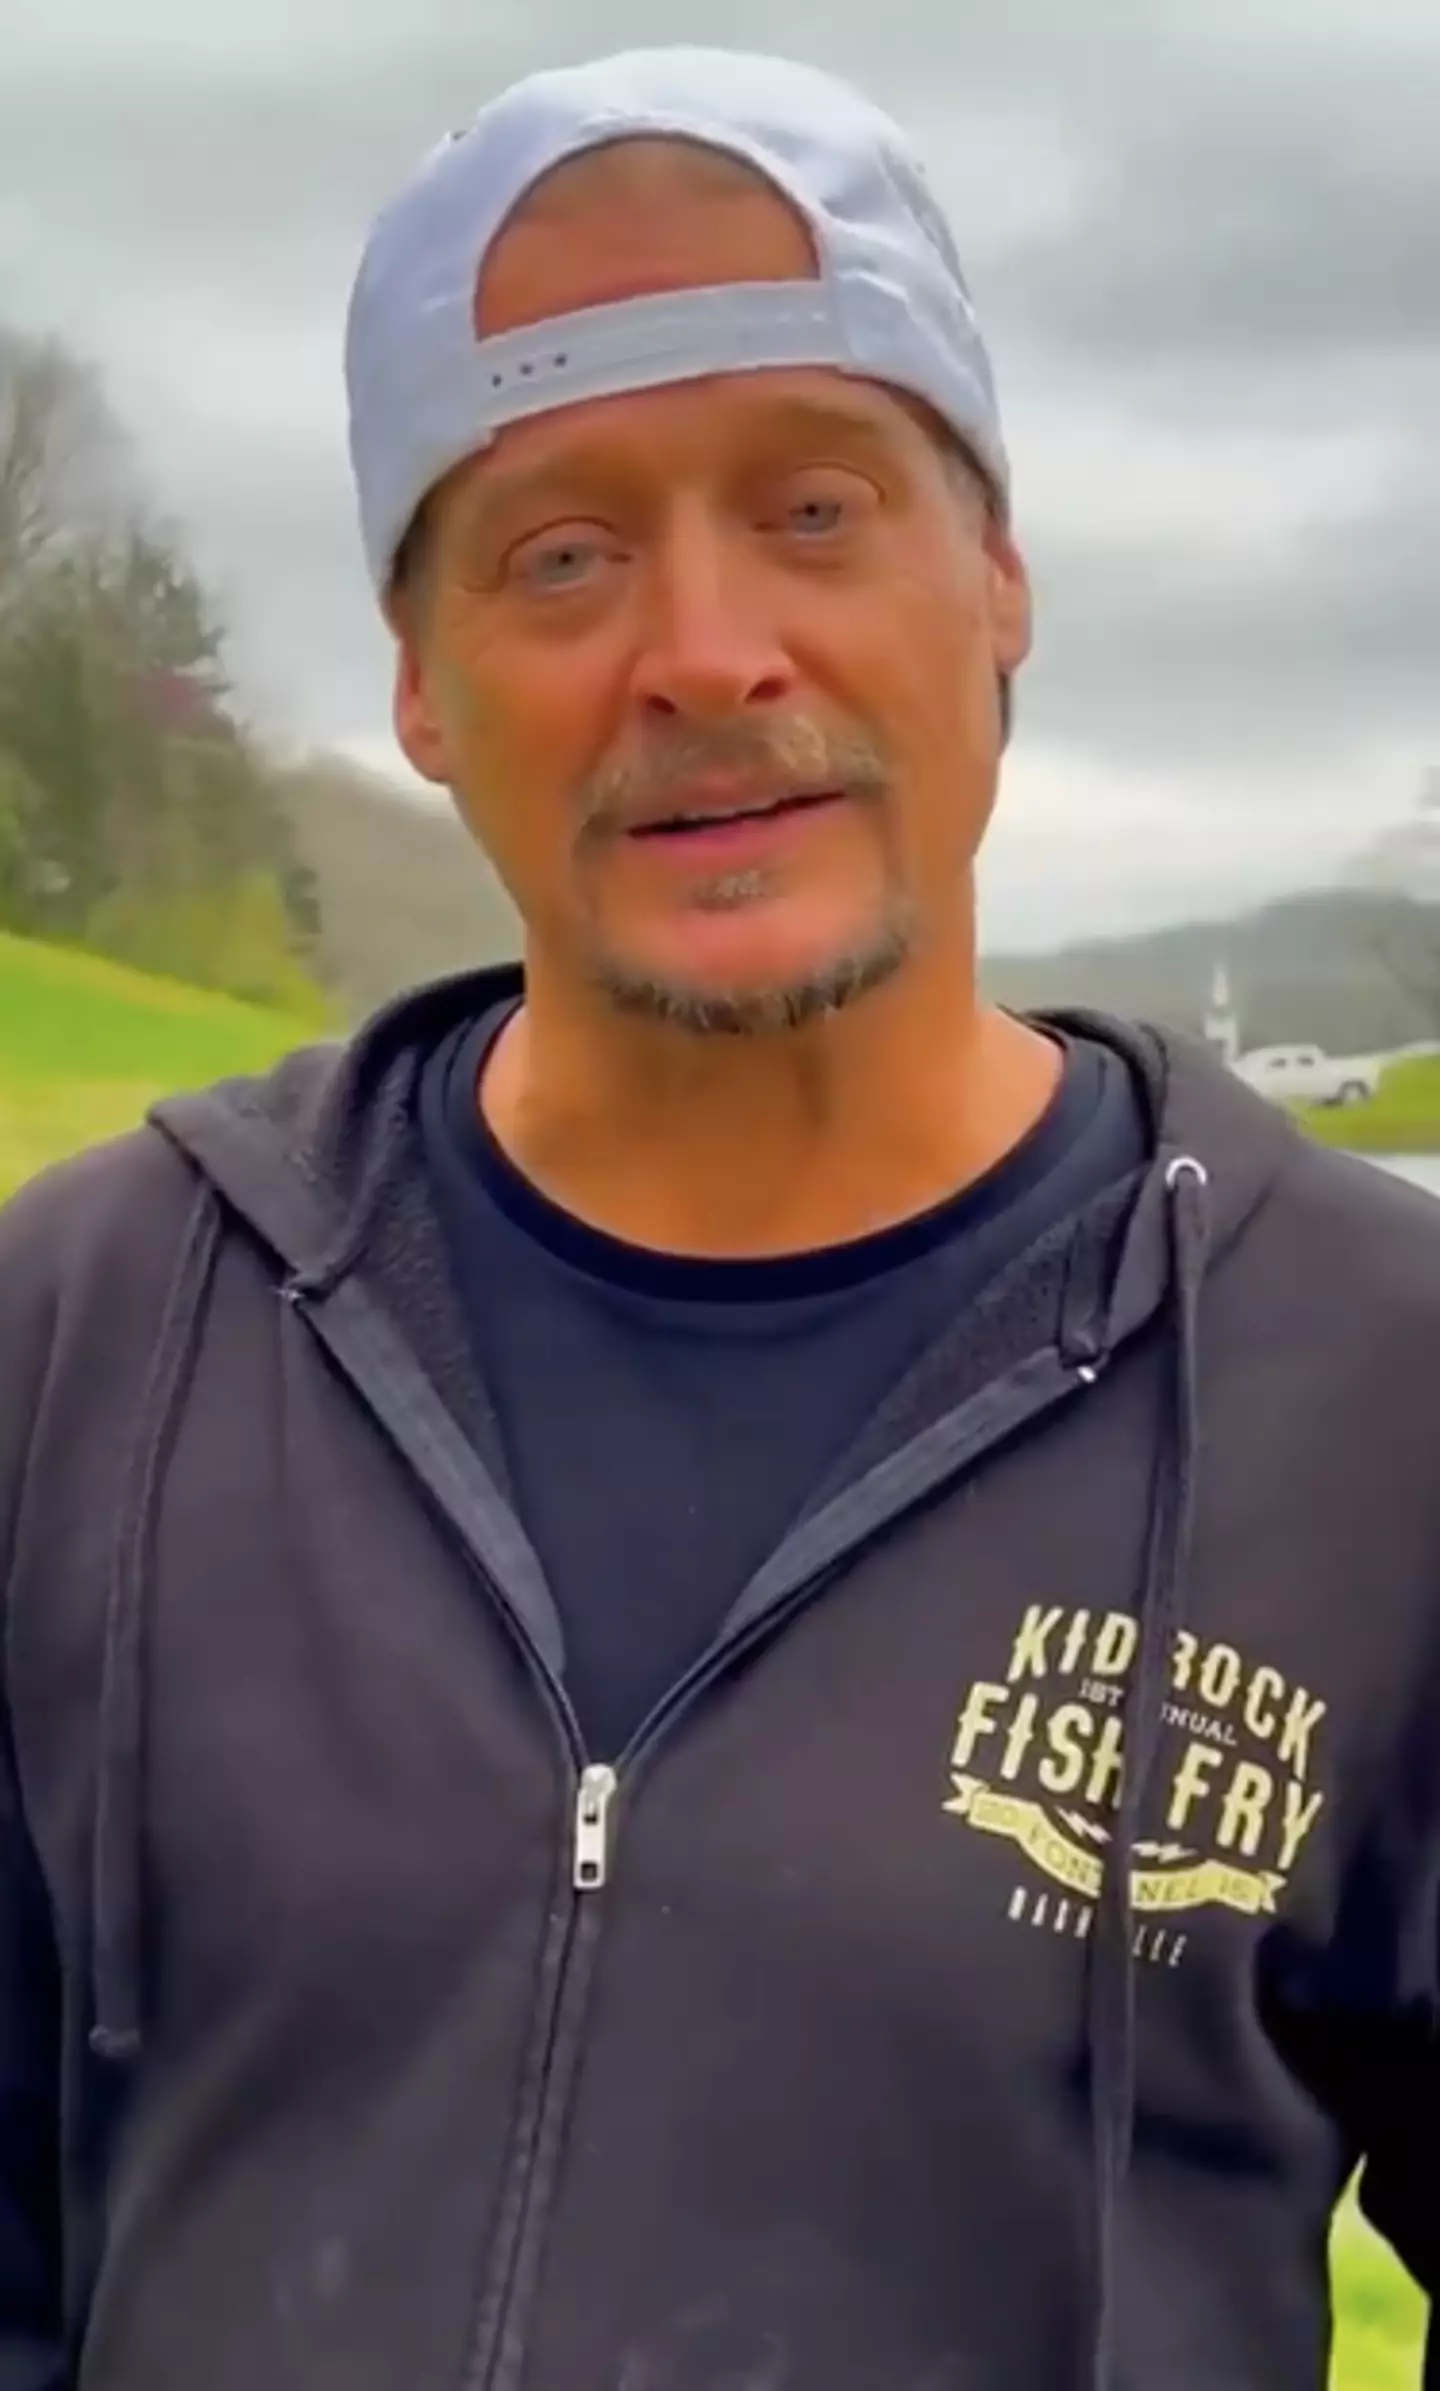 Kid Rock was not happy with Bud Light over the endorsement.